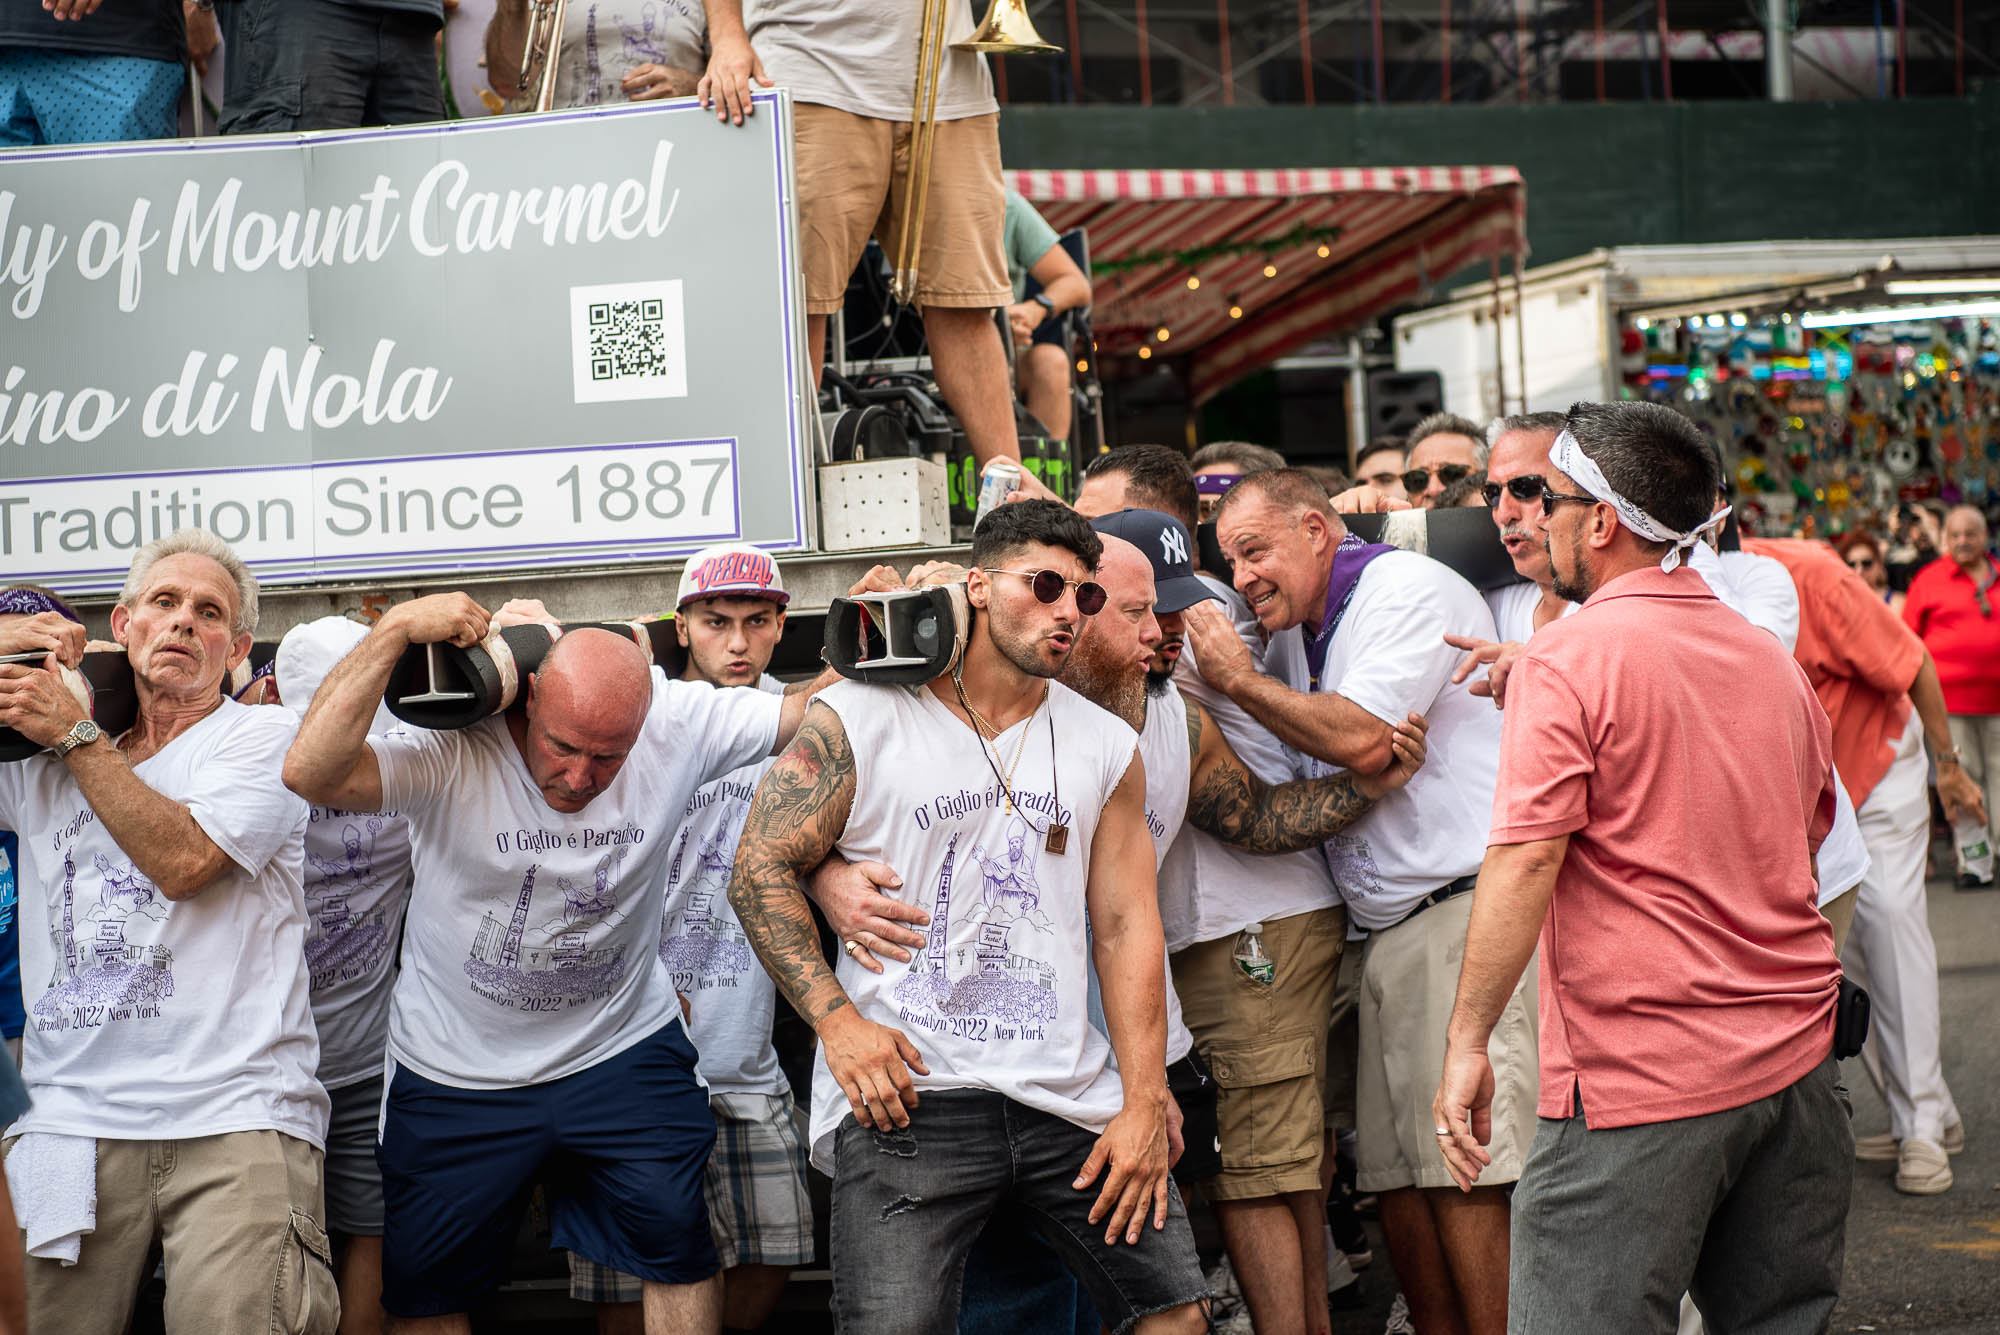 A group of burly men lift the Giglio